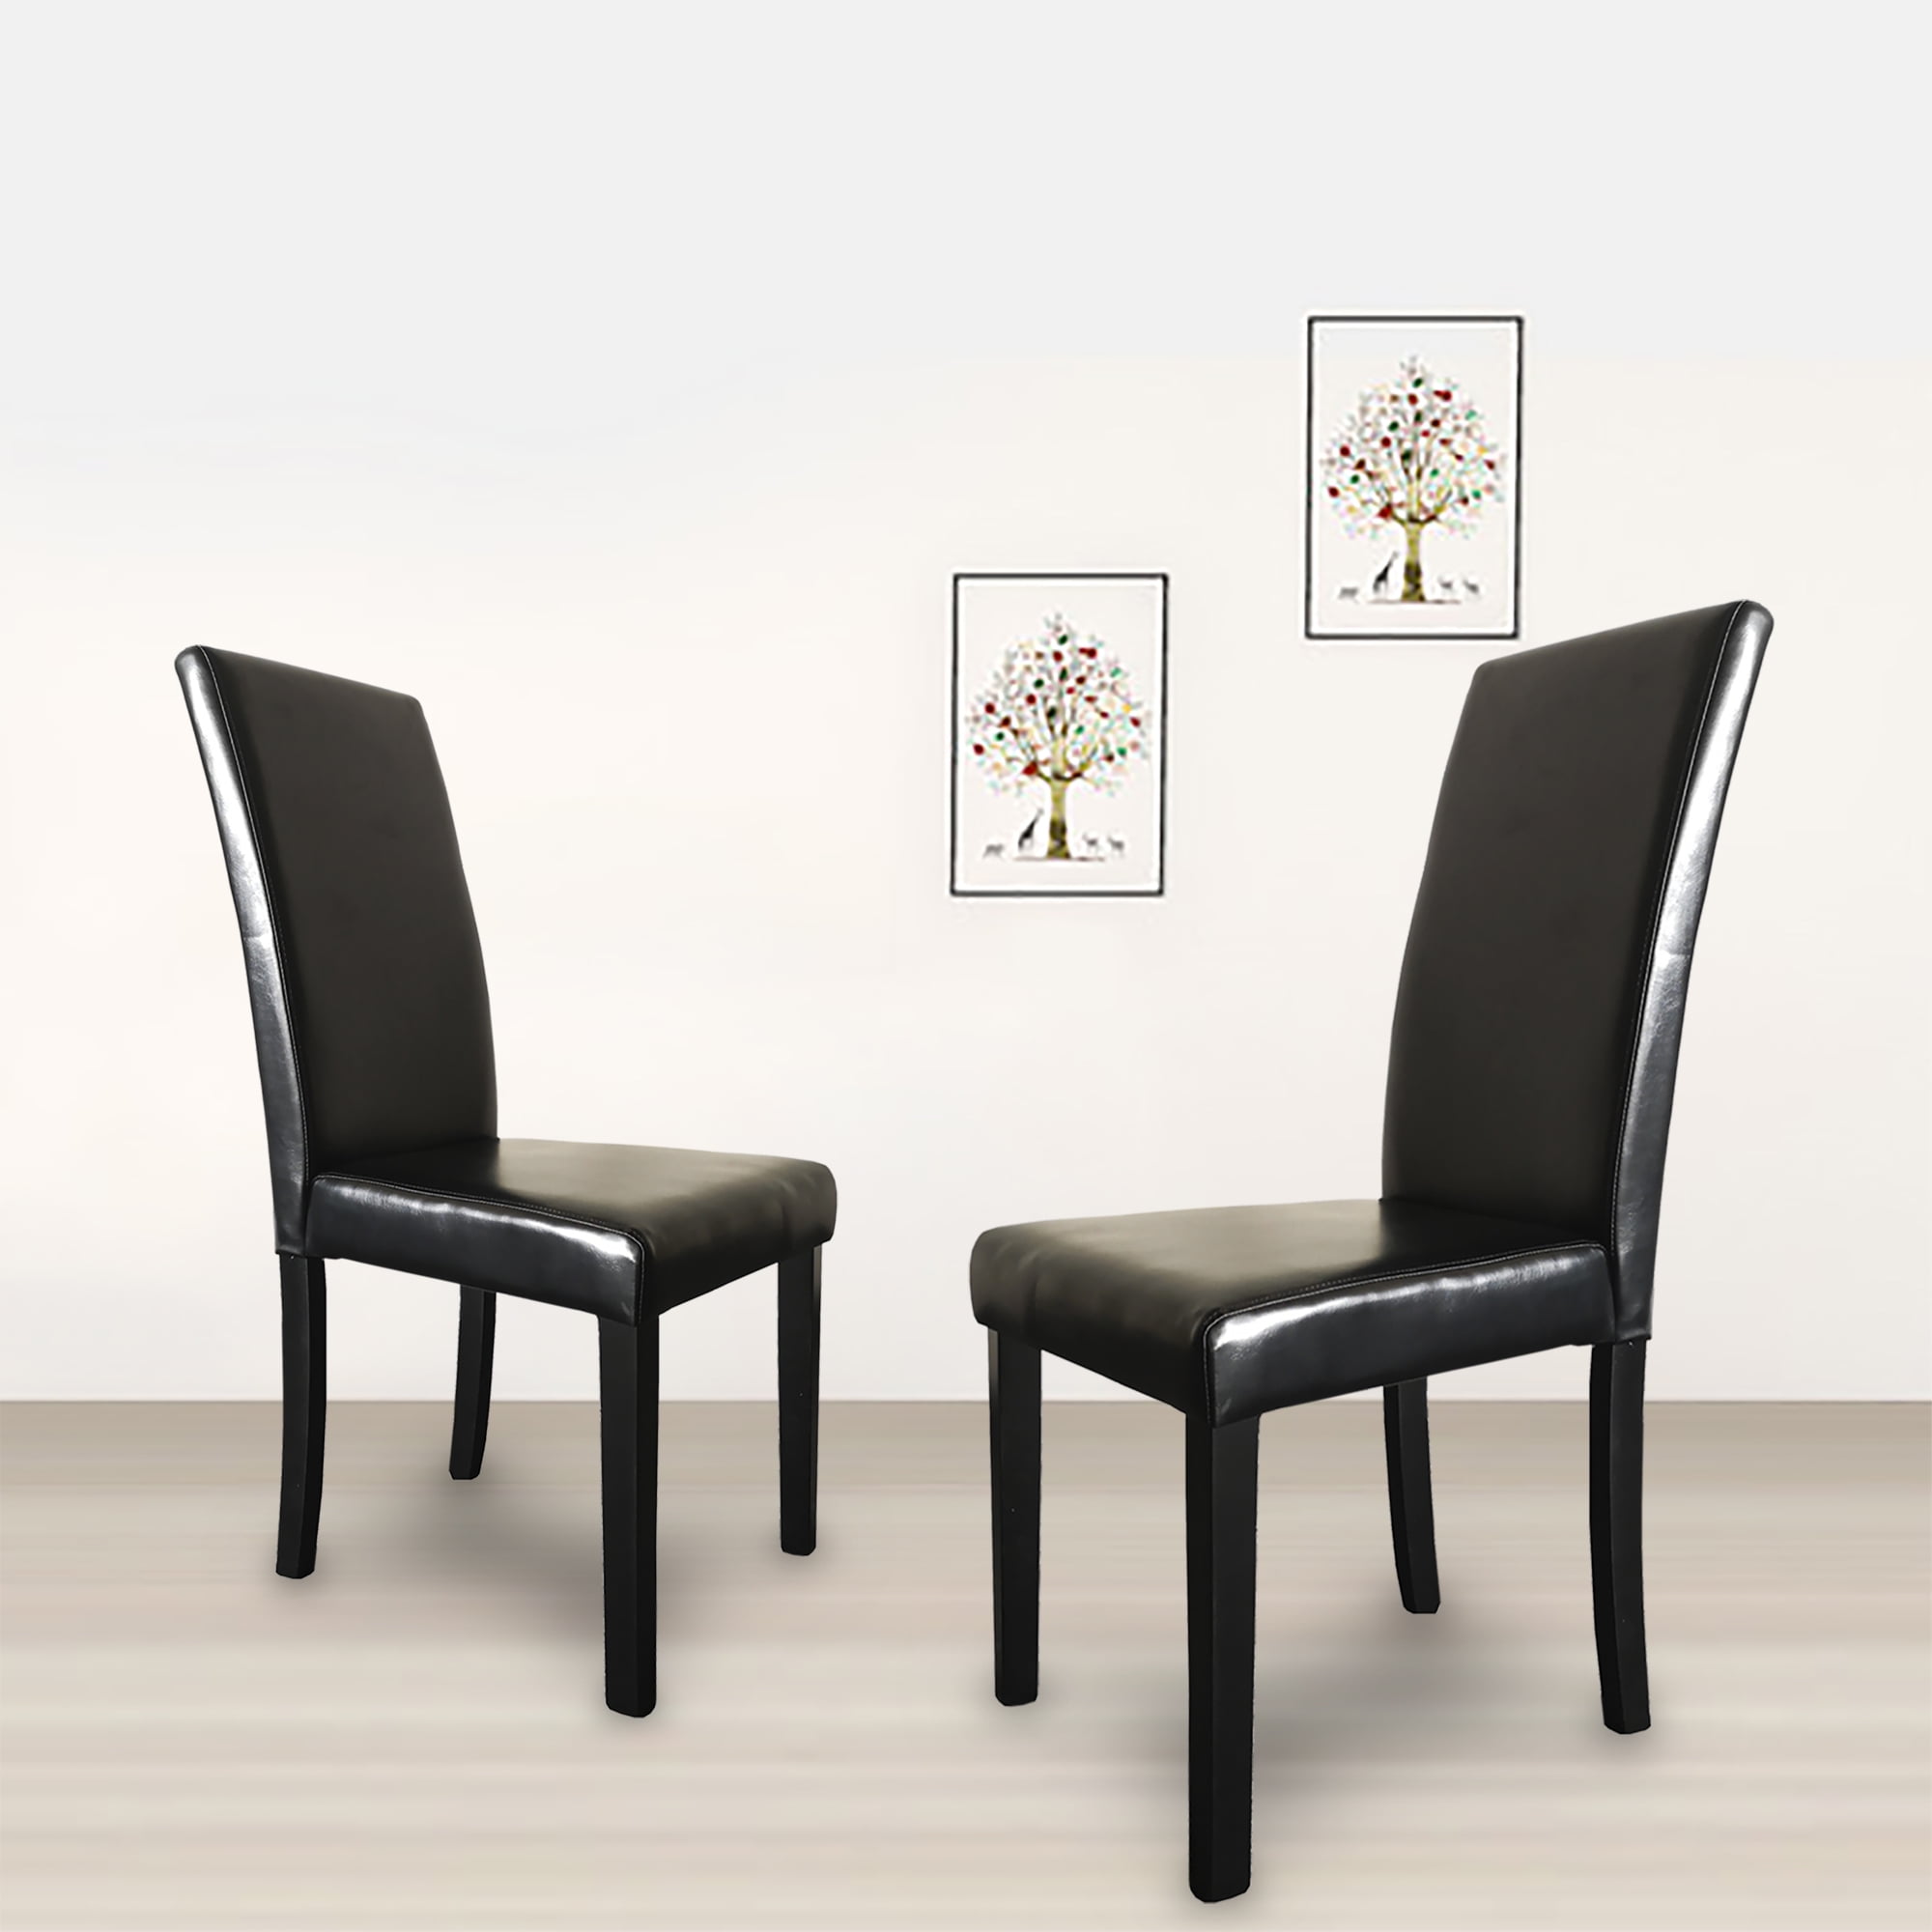 Latest Walmart Dining Room Chairs News Update